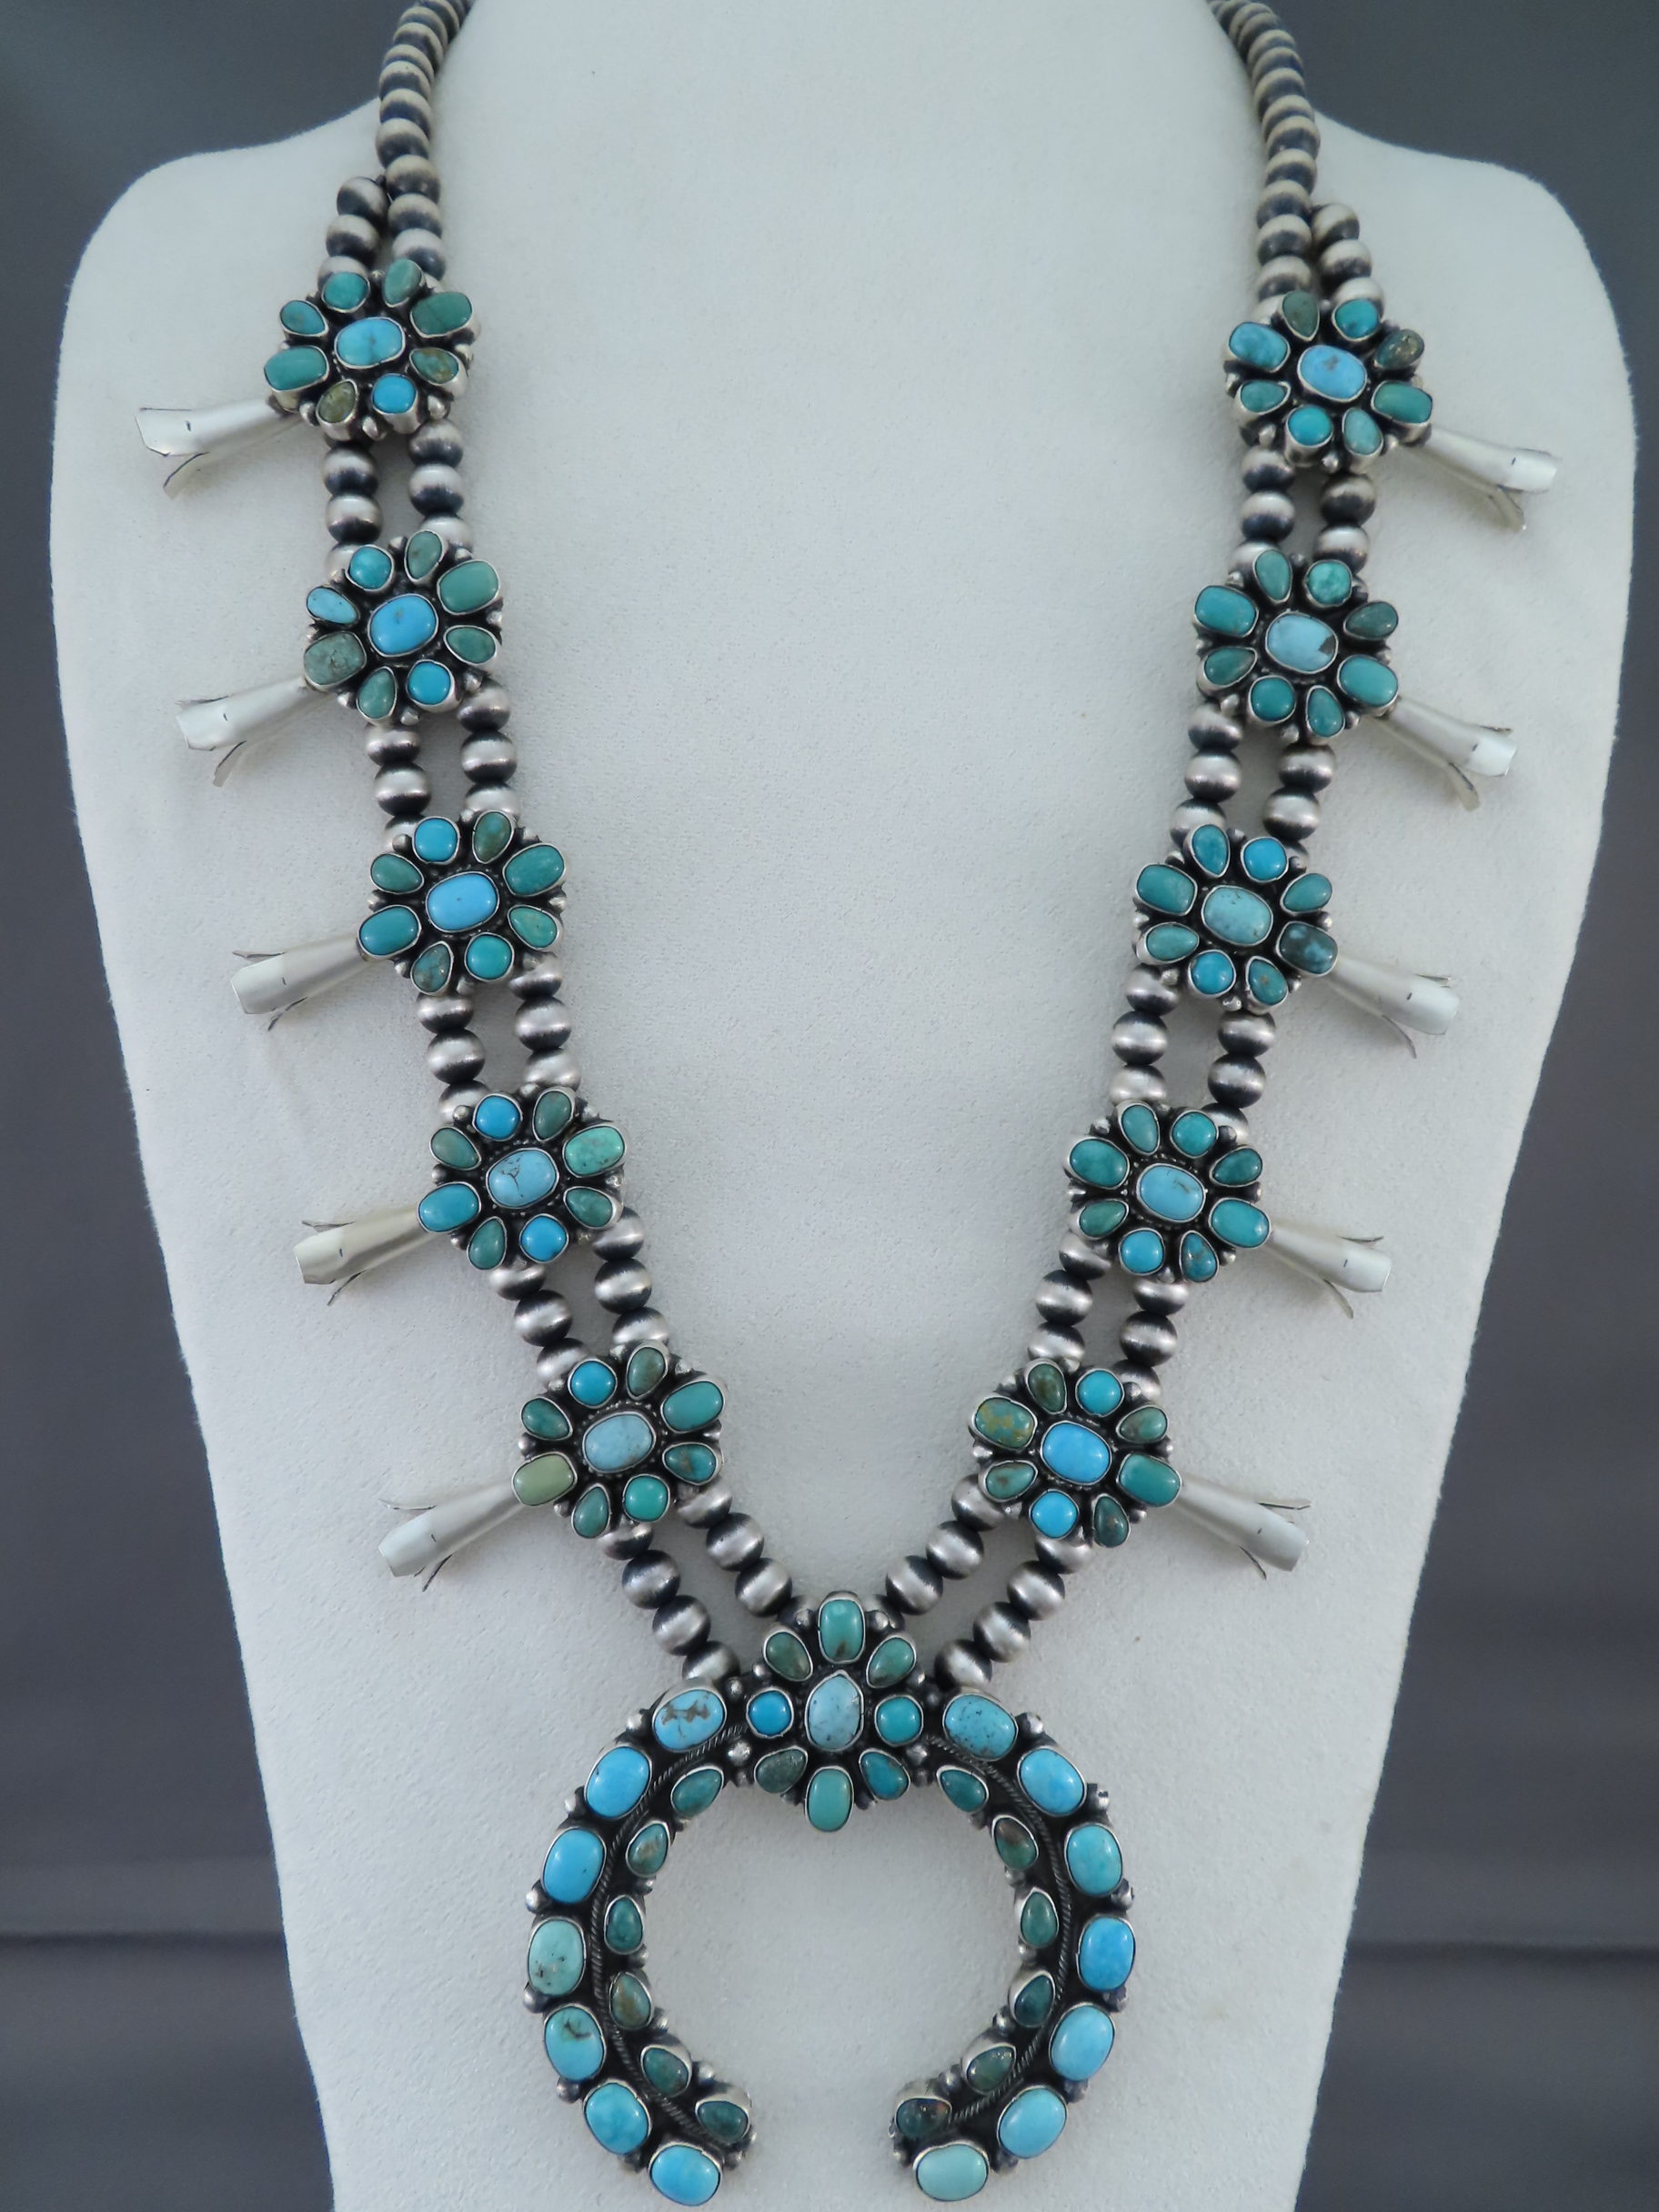 Squash Necklace - Fox Turquoise Squash Blossom Necklace by Navajo Indian jewelry artist, Bobby Johnson FOR SALE $2,750-